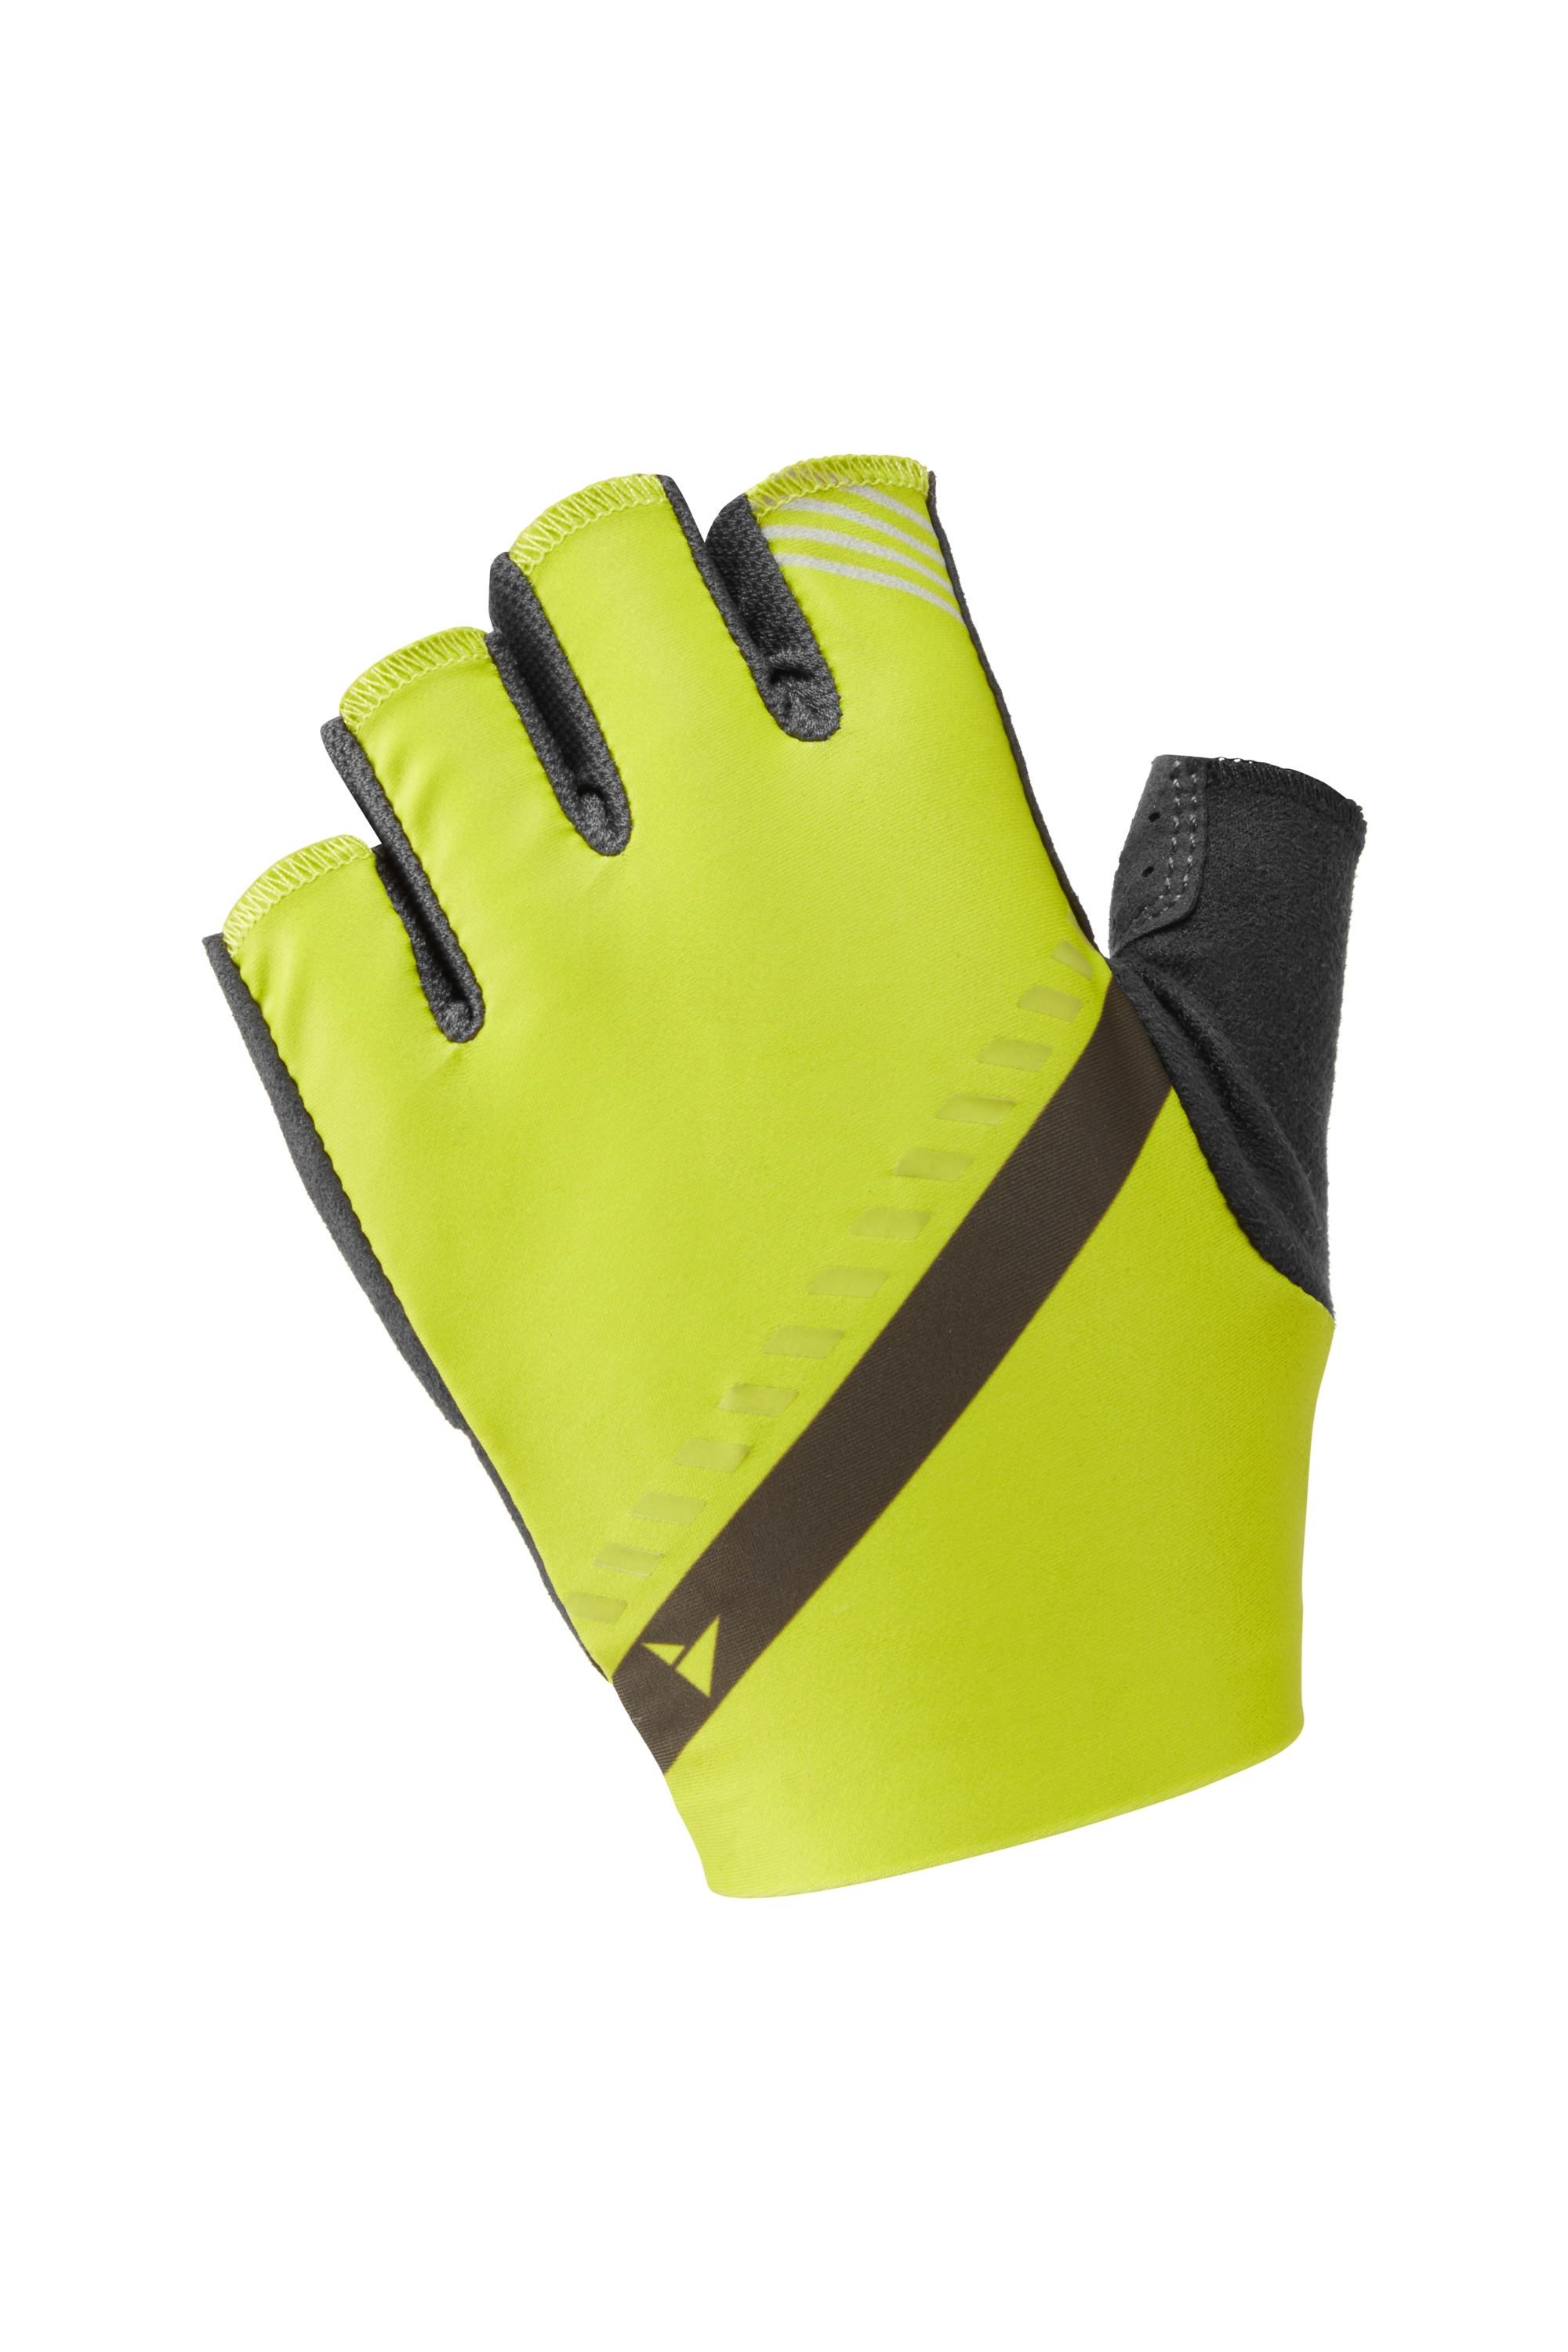 Progel Unisex Cycling Mitts -